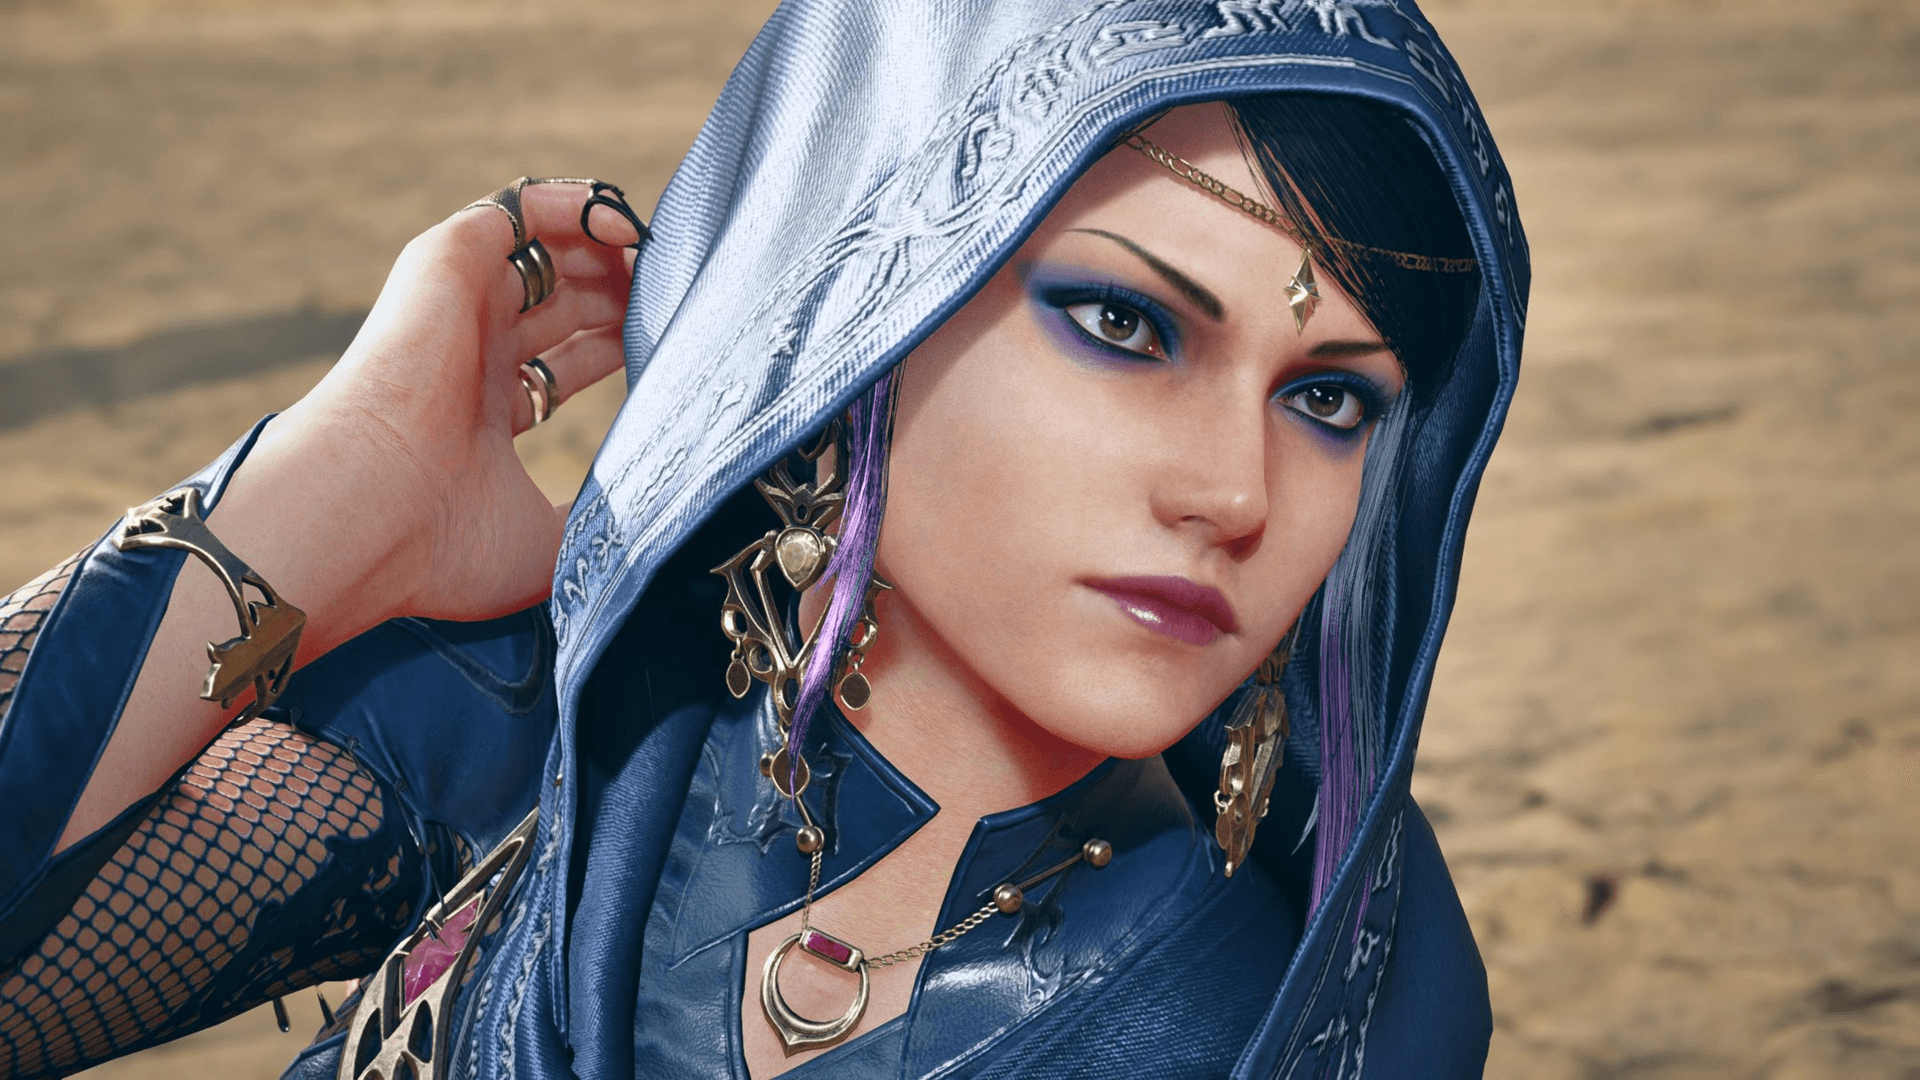 Tekken 8 Zafina Character Guide: All You Need to Know